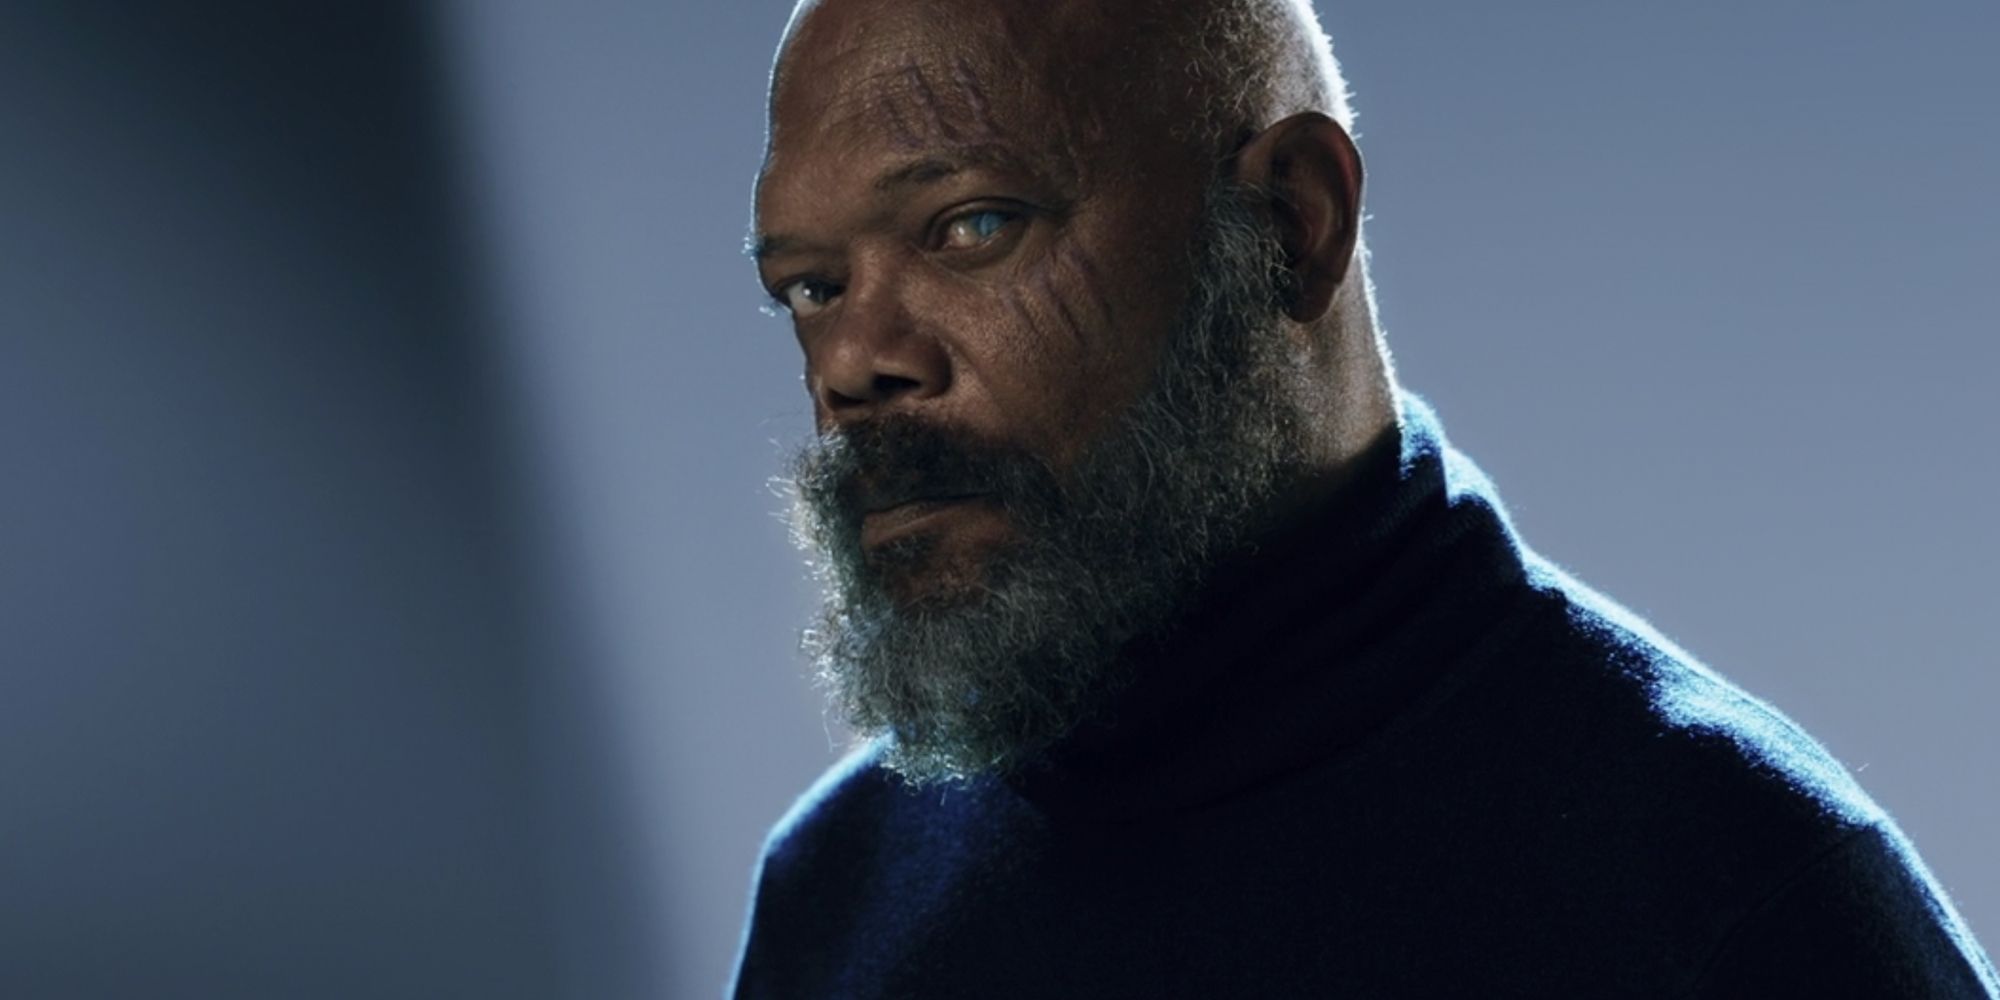 Nick Fury without his eye patch looking at the camera